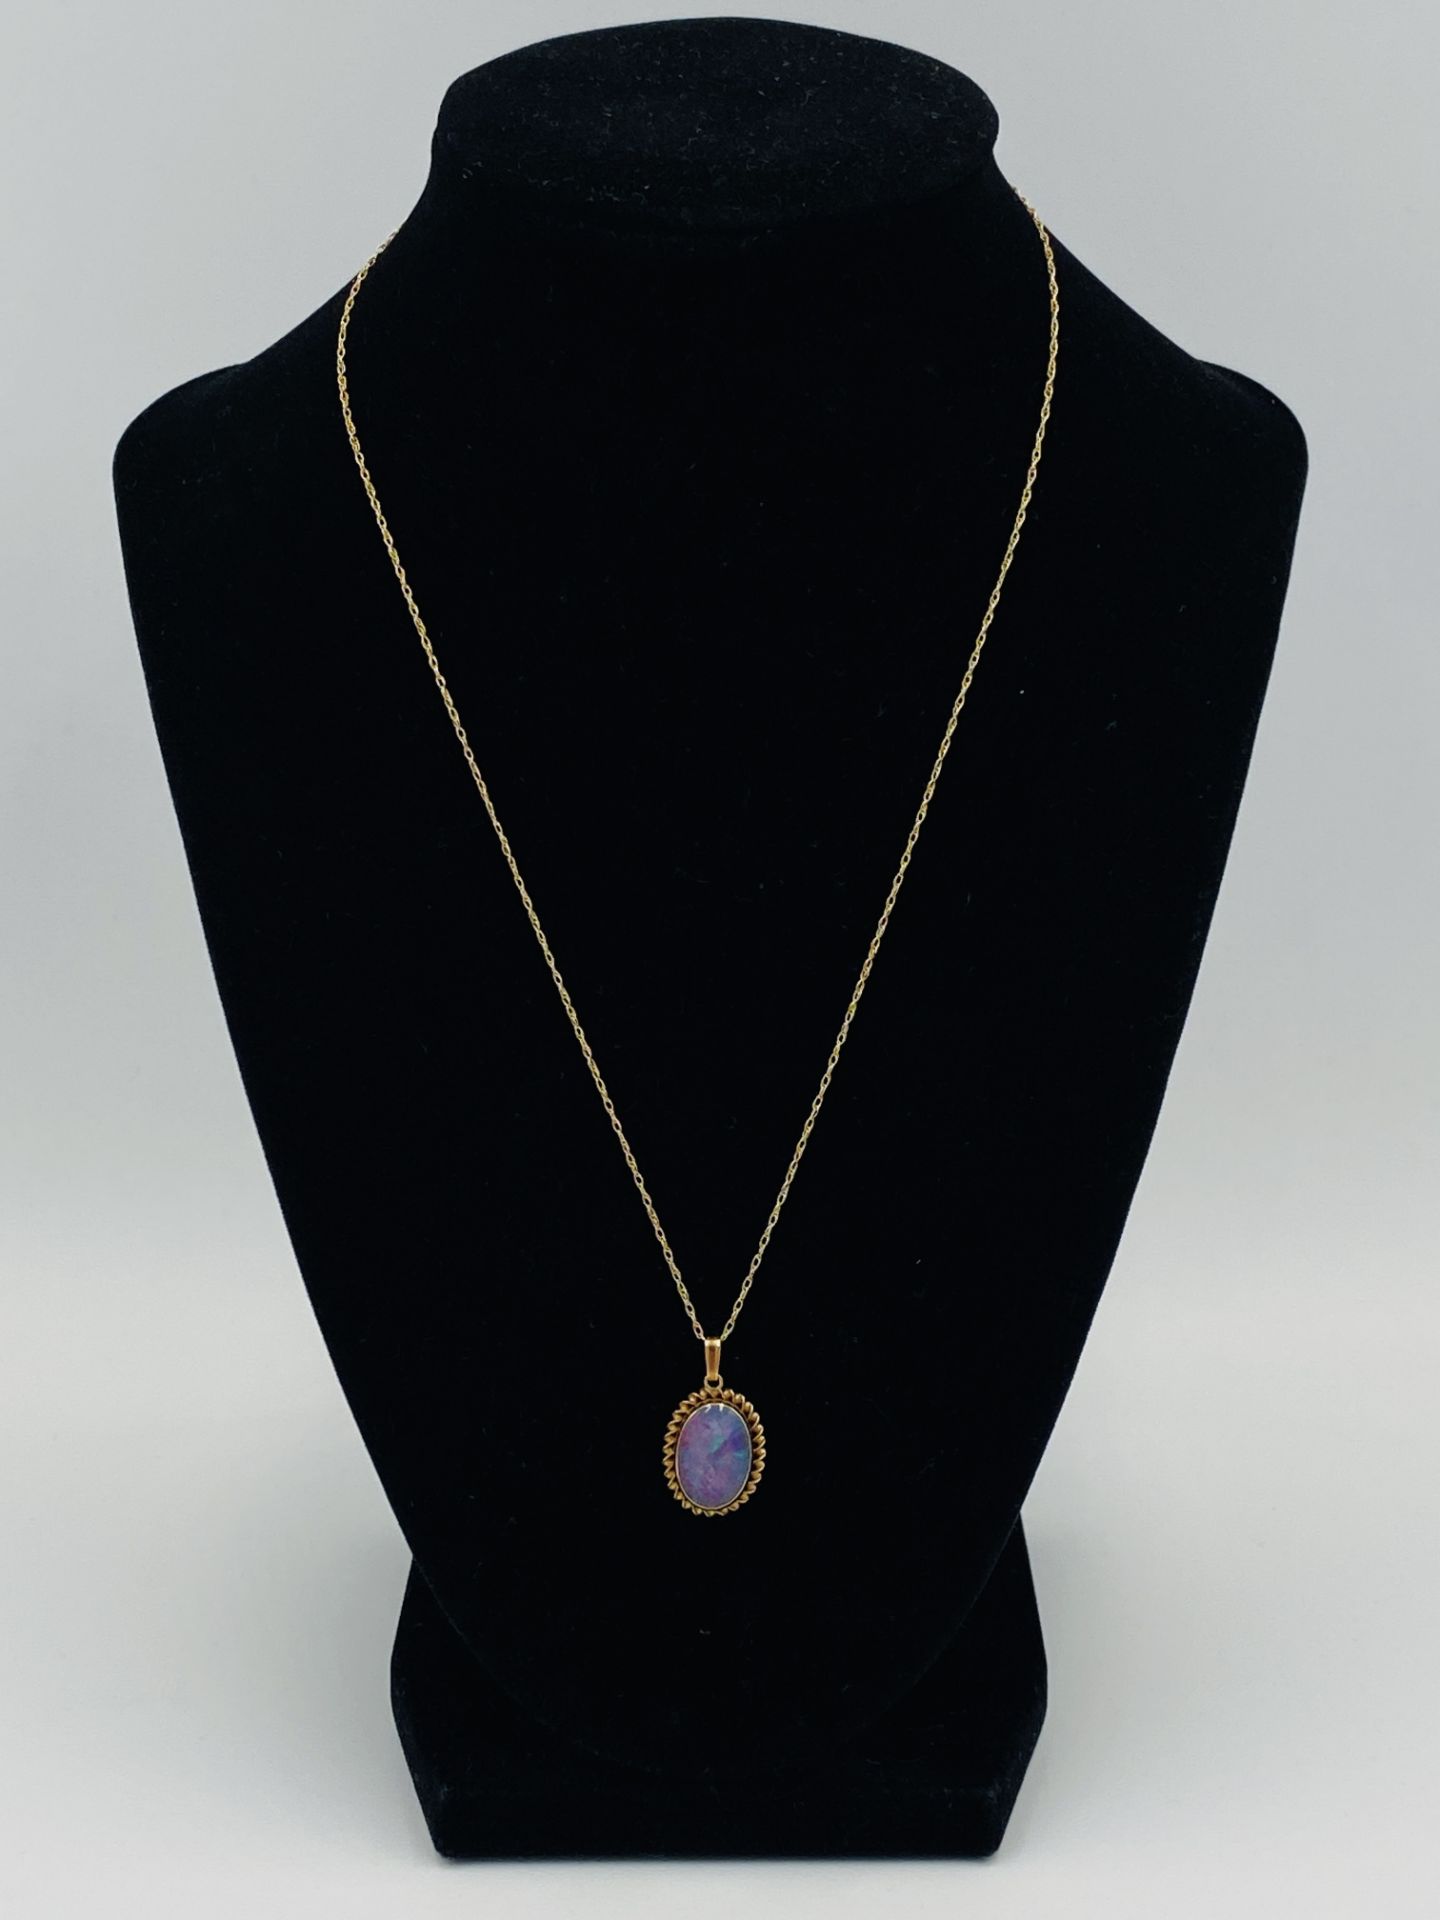 9ct pendant set with an opal - Image 4 of 4